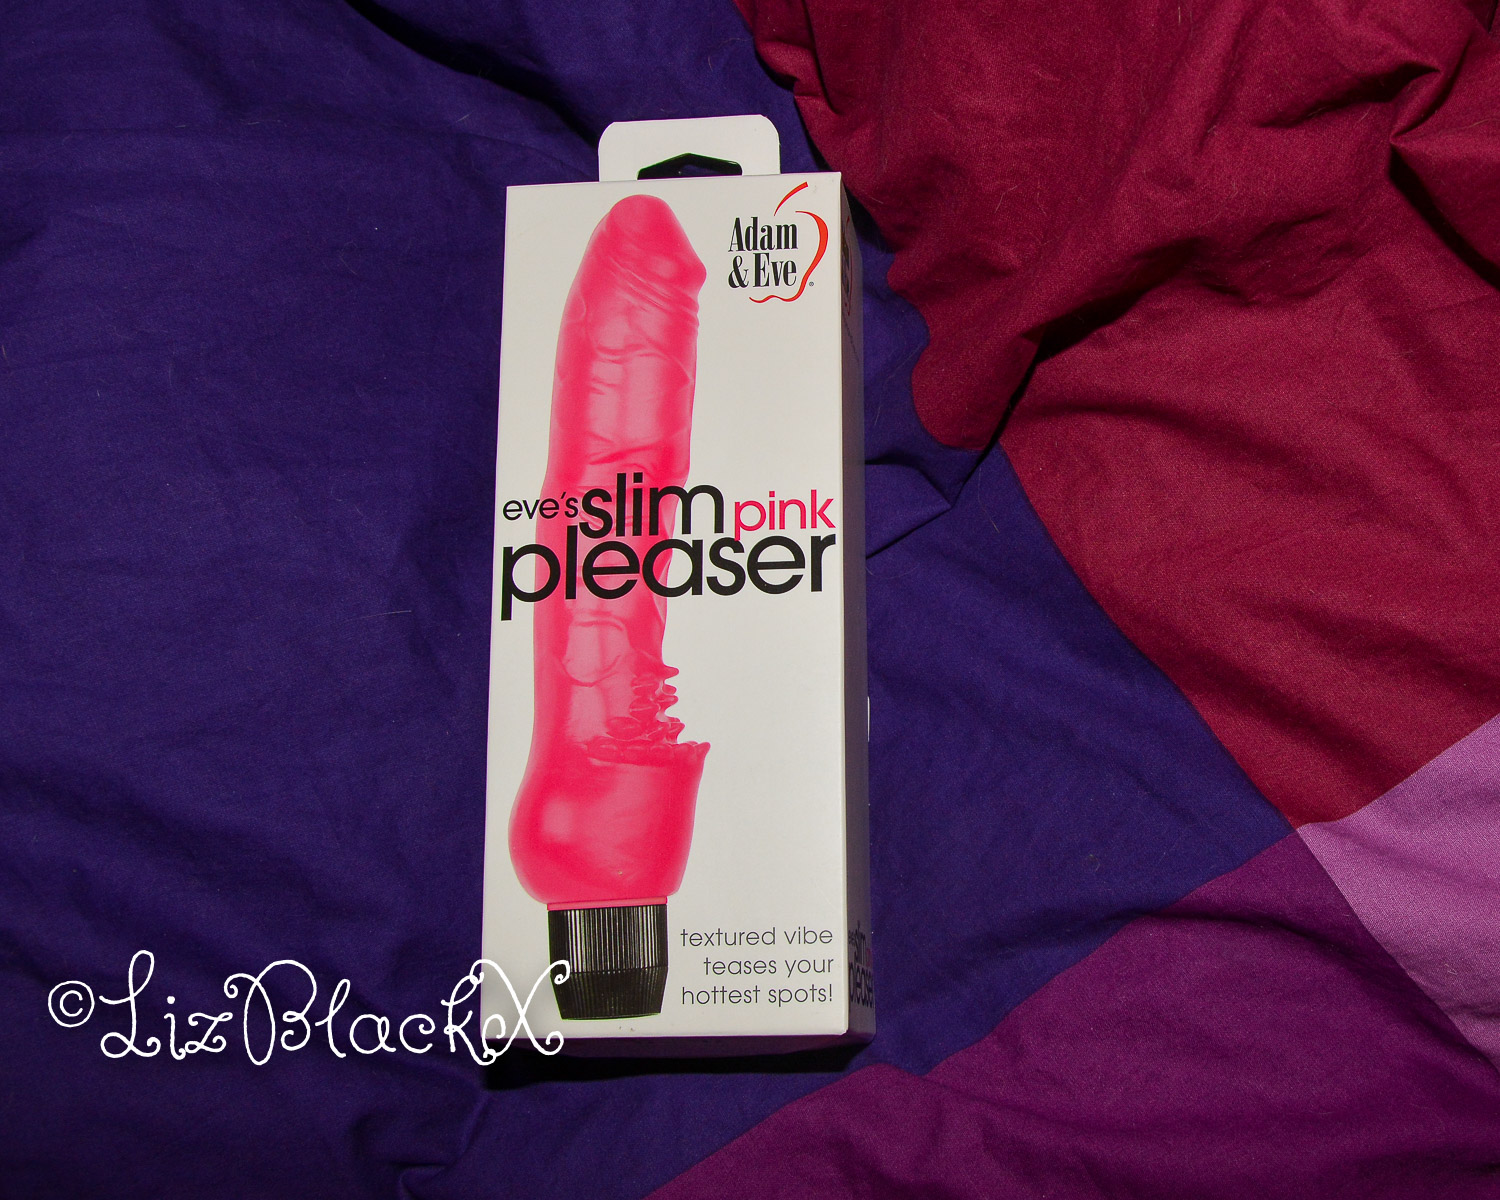 Fiction – In-Depth Instructions with Eve’s Slim Pink Pleaser – Adam and Eve